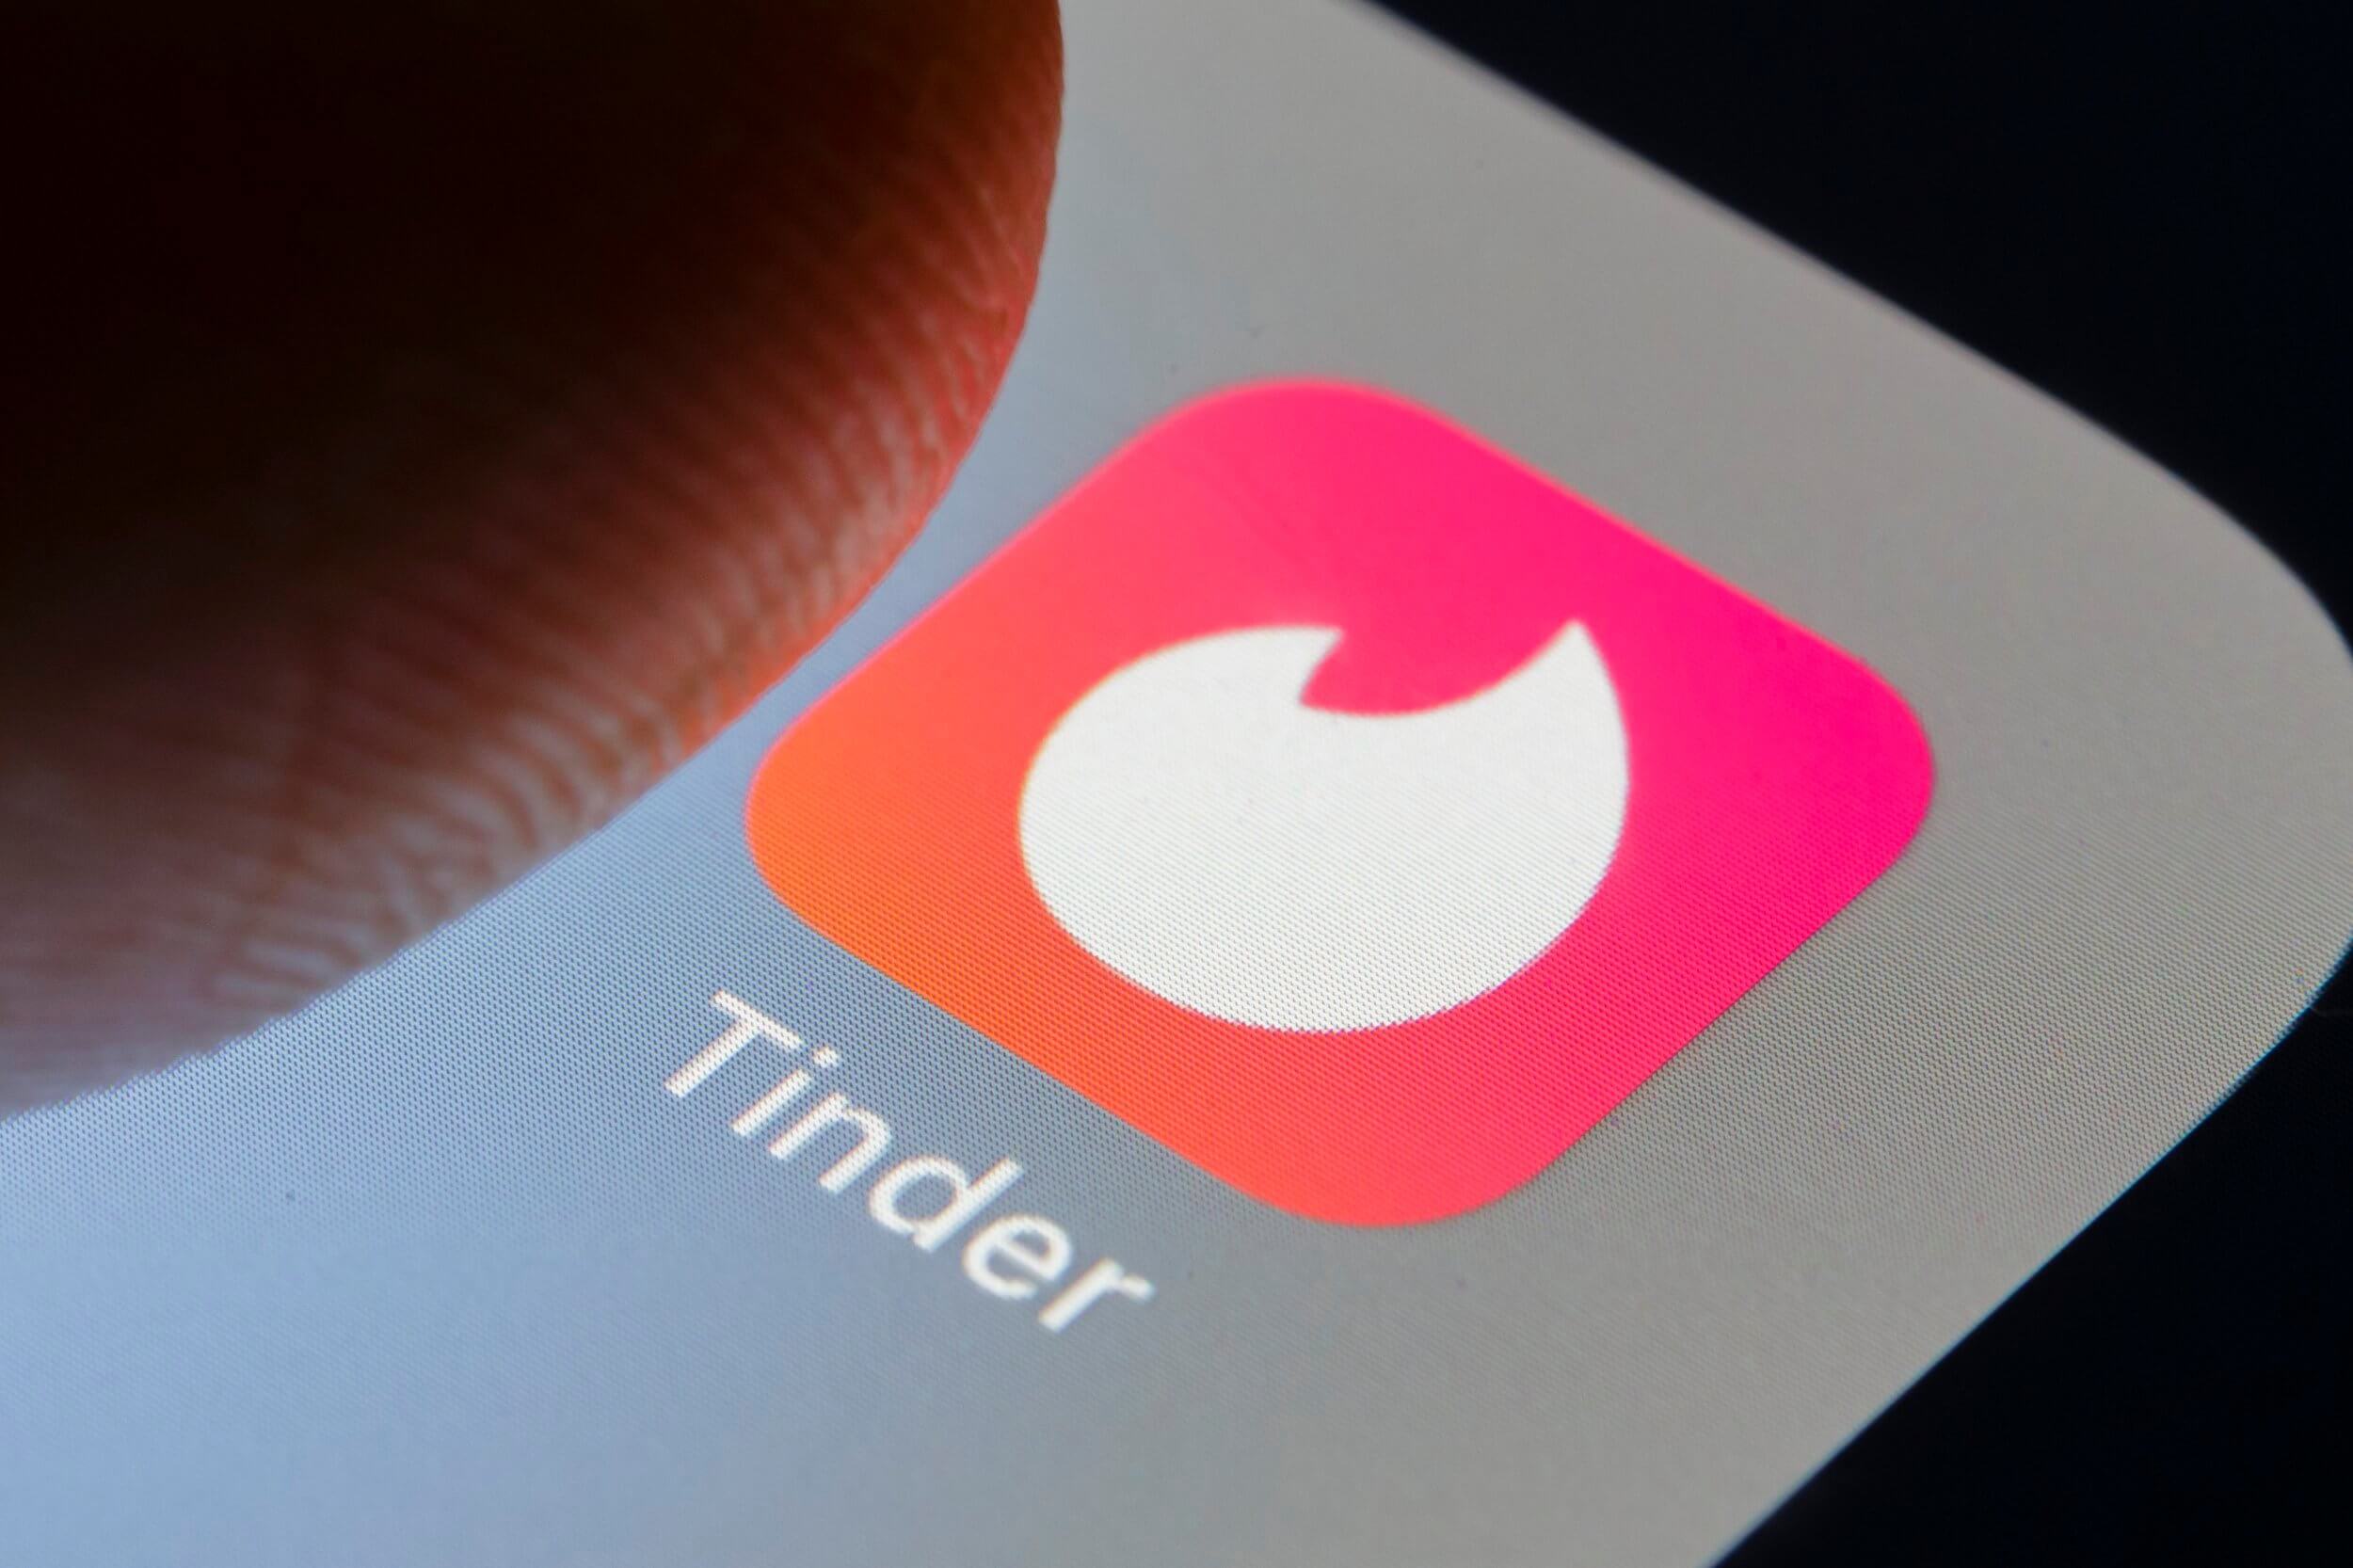 Tinder Gold Apk Download Unlimited Swipes, Likes, and Super Likes